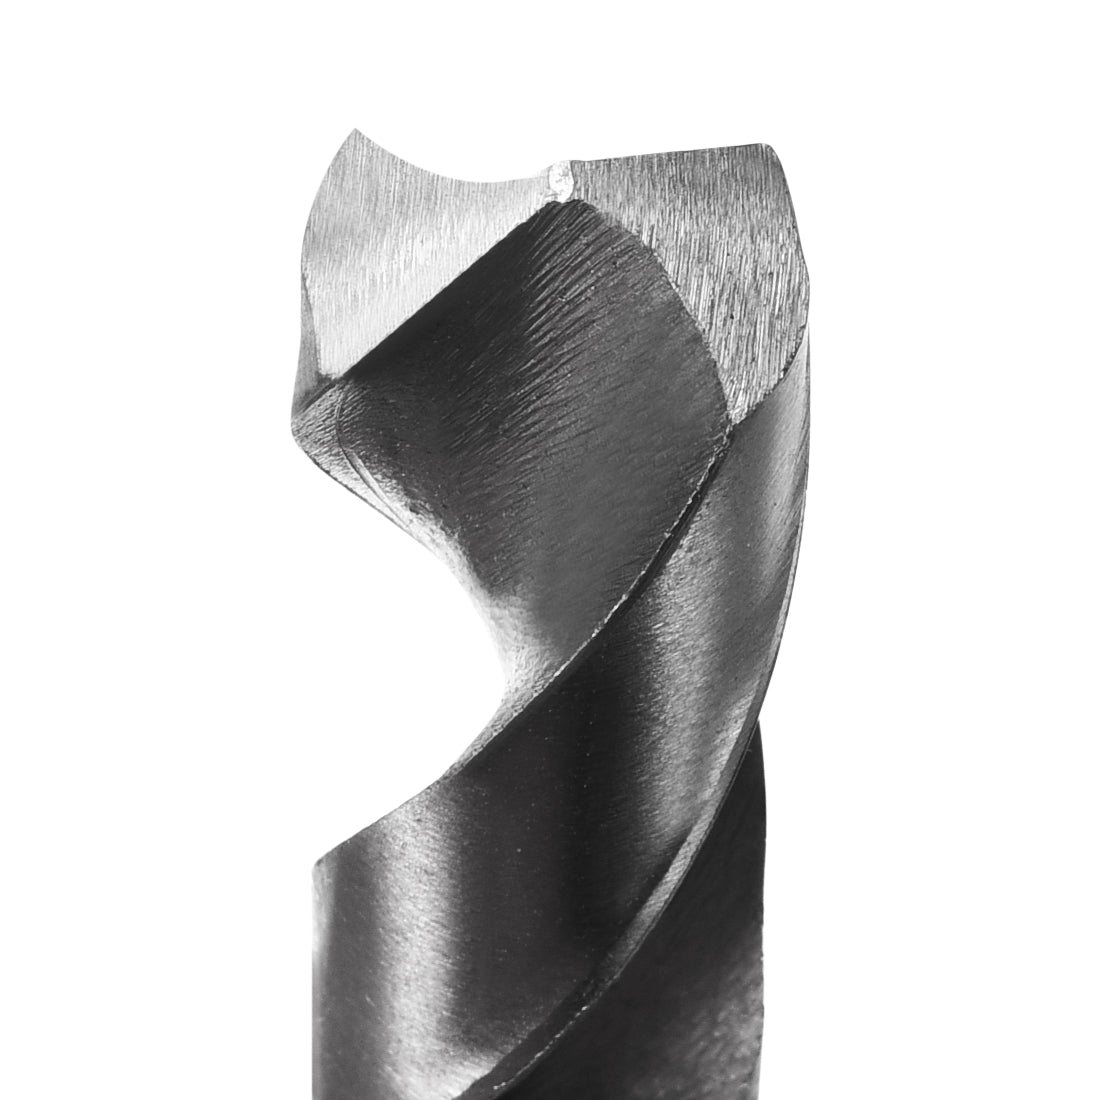 uxcell Uxcell 15.5mm Reduced Shank Drill Bit High Speed Steel 4241 with 1/2" Straight Shank